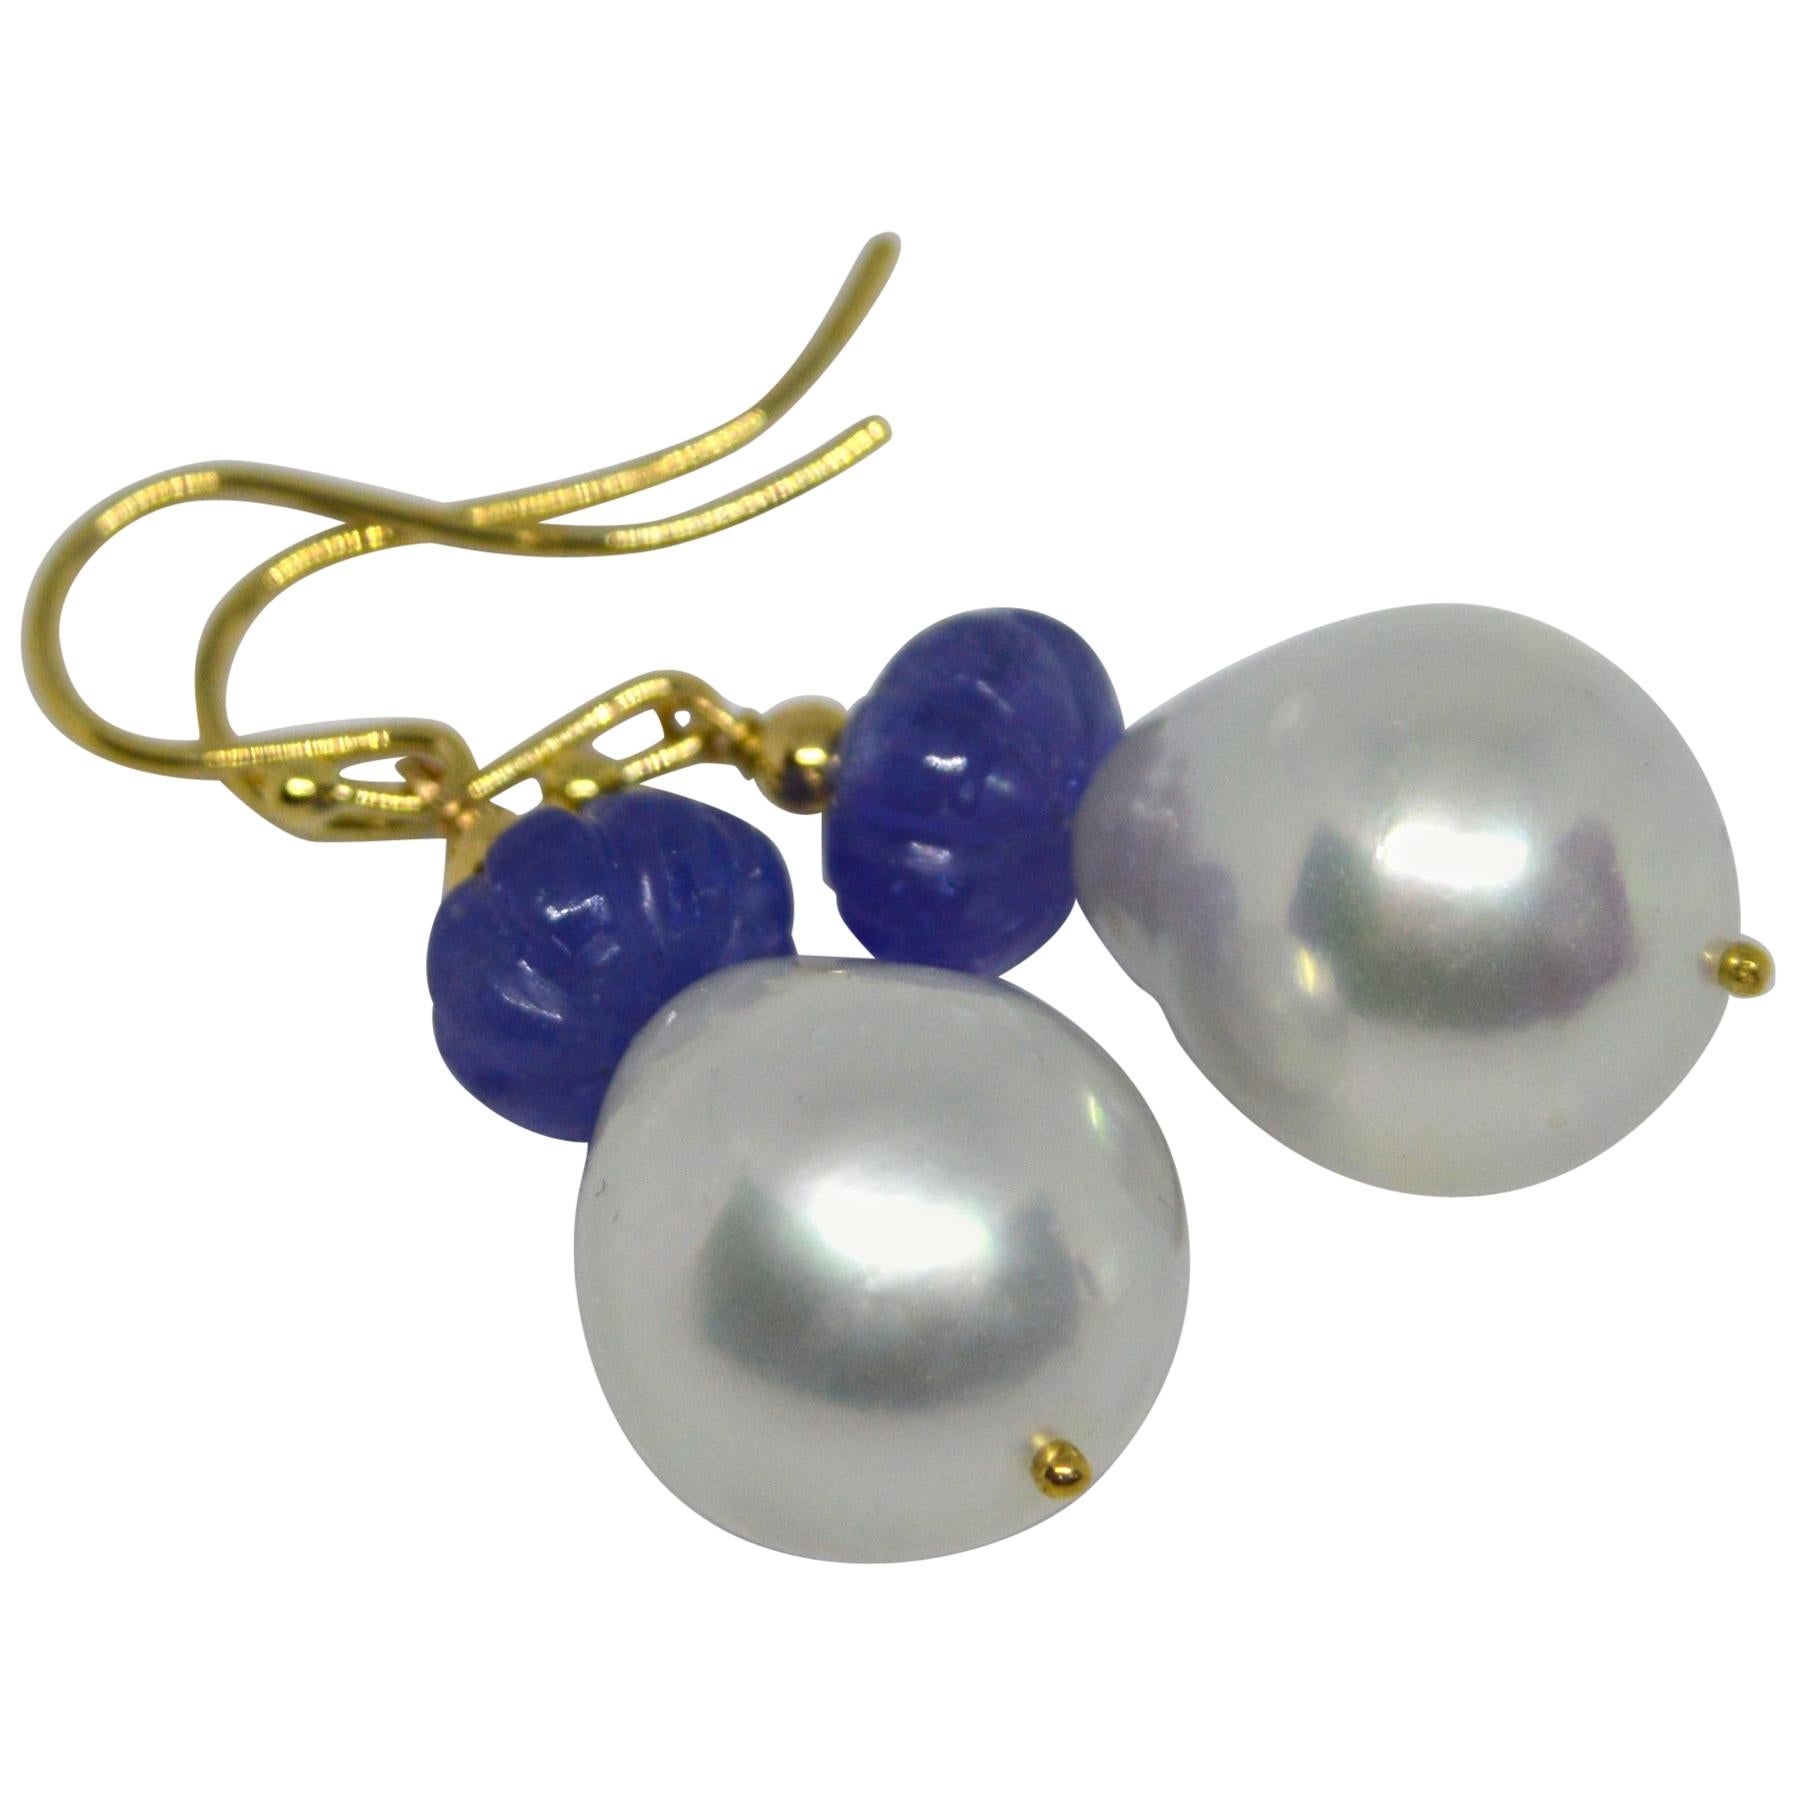 Decadent Jewels Carved Tanzanite South Sea Pearl 9k &14k Gold Earrings